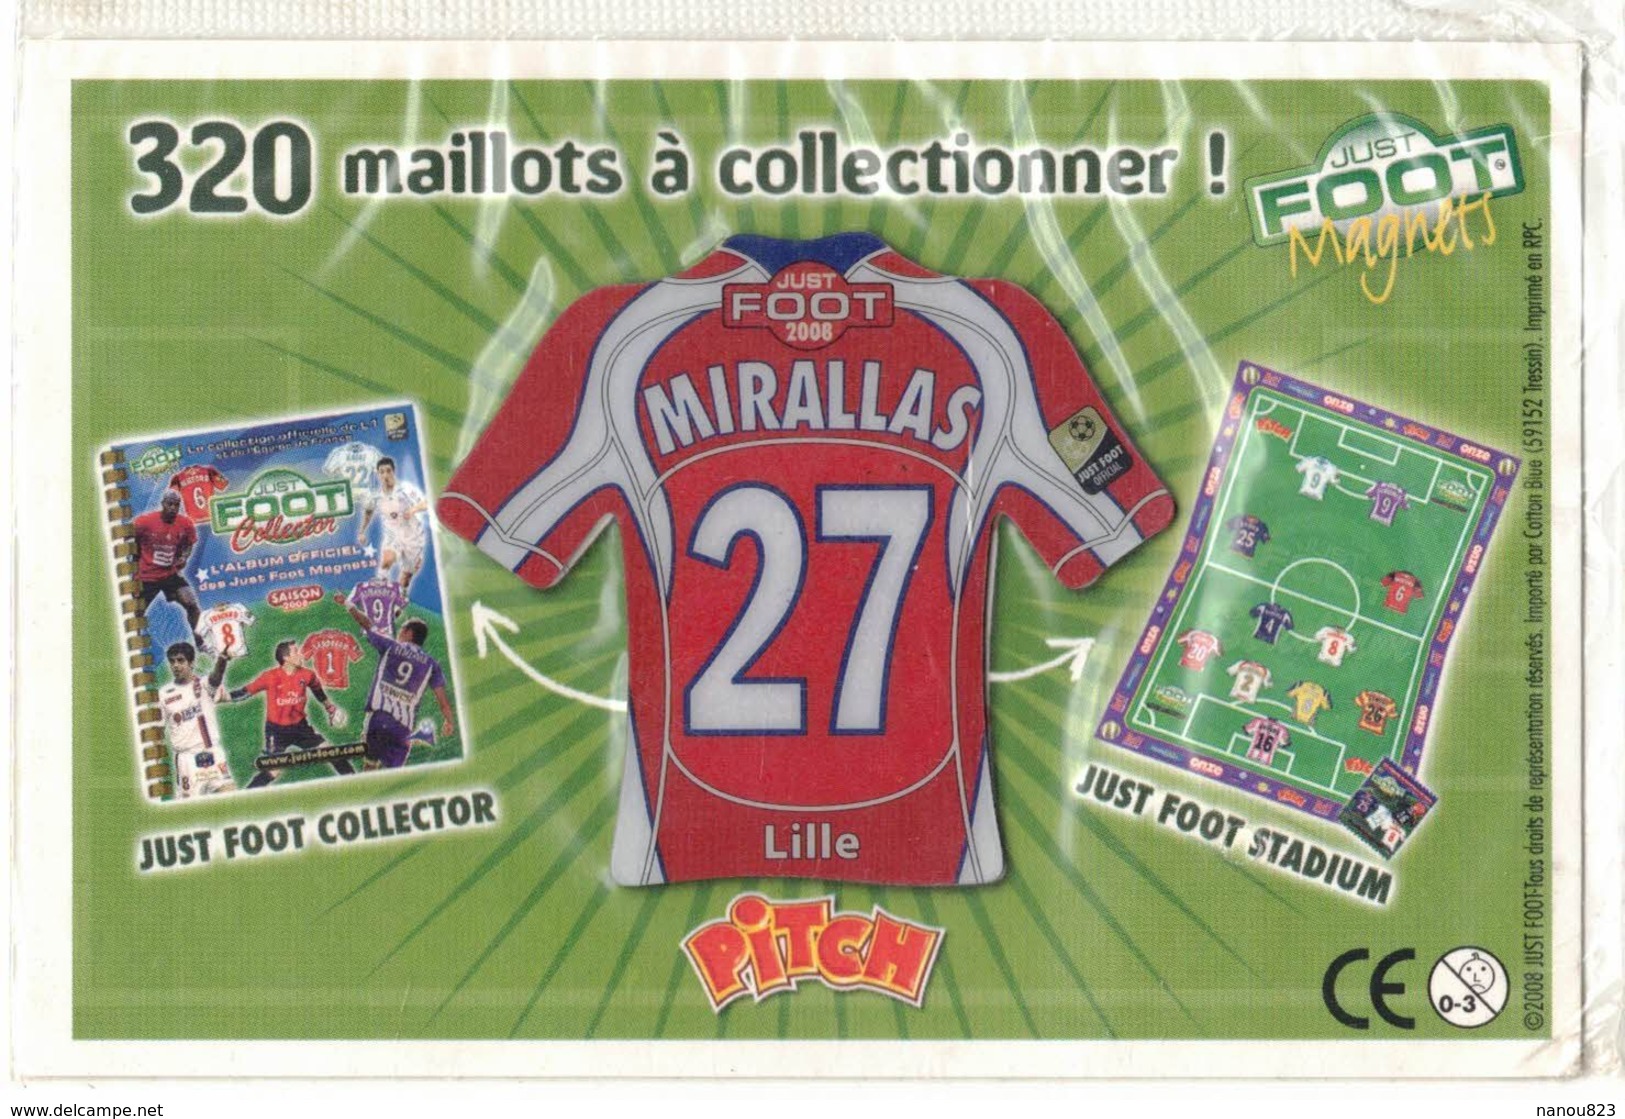 FOOTBALL ANNEE 2008 MAGNETS PUBLICITAIRE  JUST PITCH FOOT LILLE LOSC 27 JOUEUR MIRALLAS SOUS BLISTER - Sports